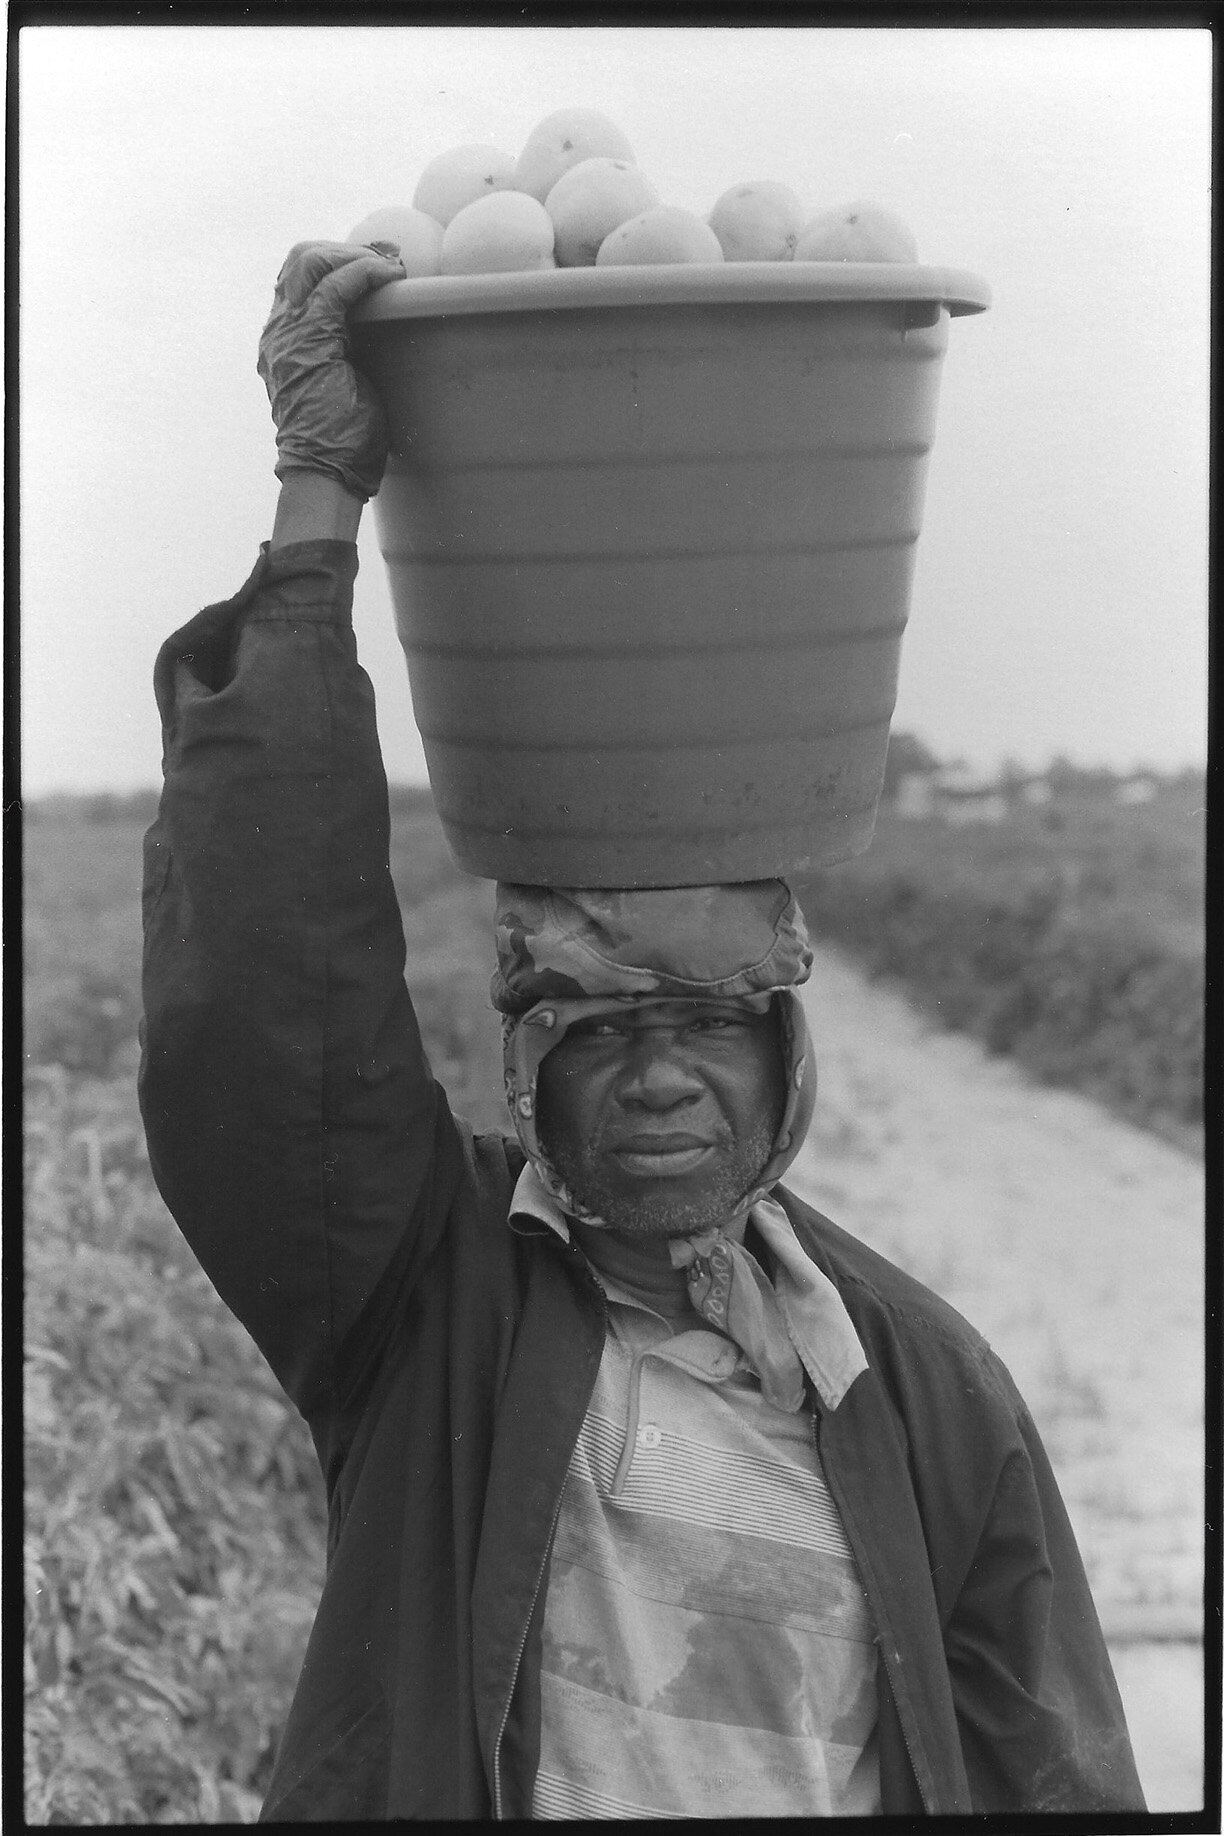   Migrant Farmworker Picking Tomatoes, Gadsden County, FL,  2020 Gelatin silver print 8 1/4 x 5 1/2 in. (image size) The Do Good Fund, Inc., 2020-050 